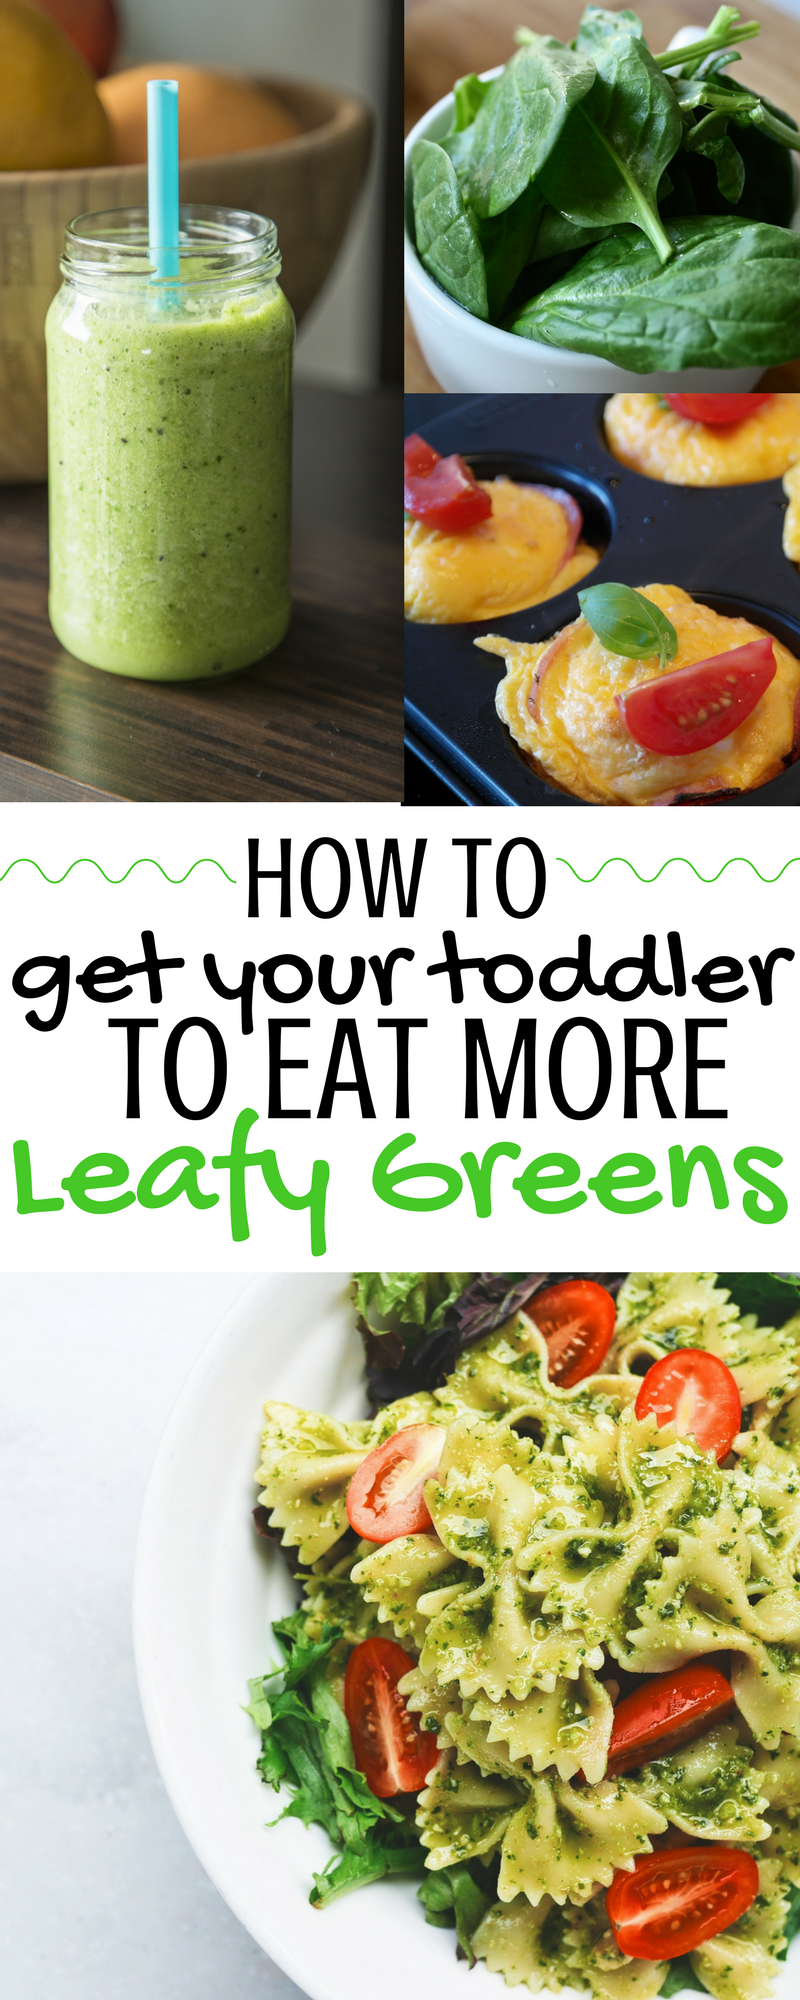 How to Get Your Toddler to Eat More Leafy Green Vegetables -   22 vegetable recipes for picky eaters
 ideas